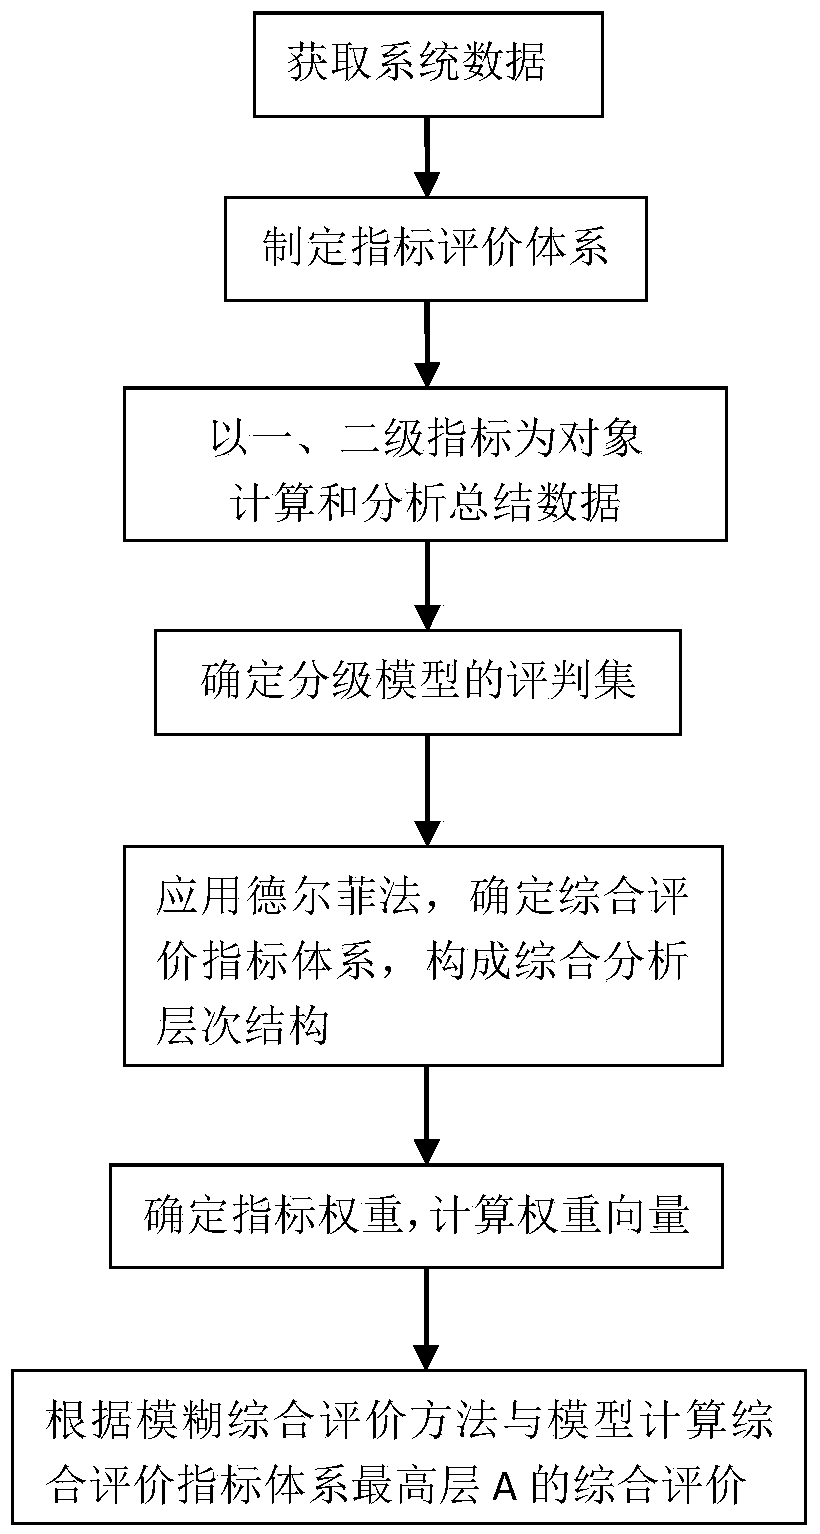 Evaluation method based on voltage reactive power control system in grid system